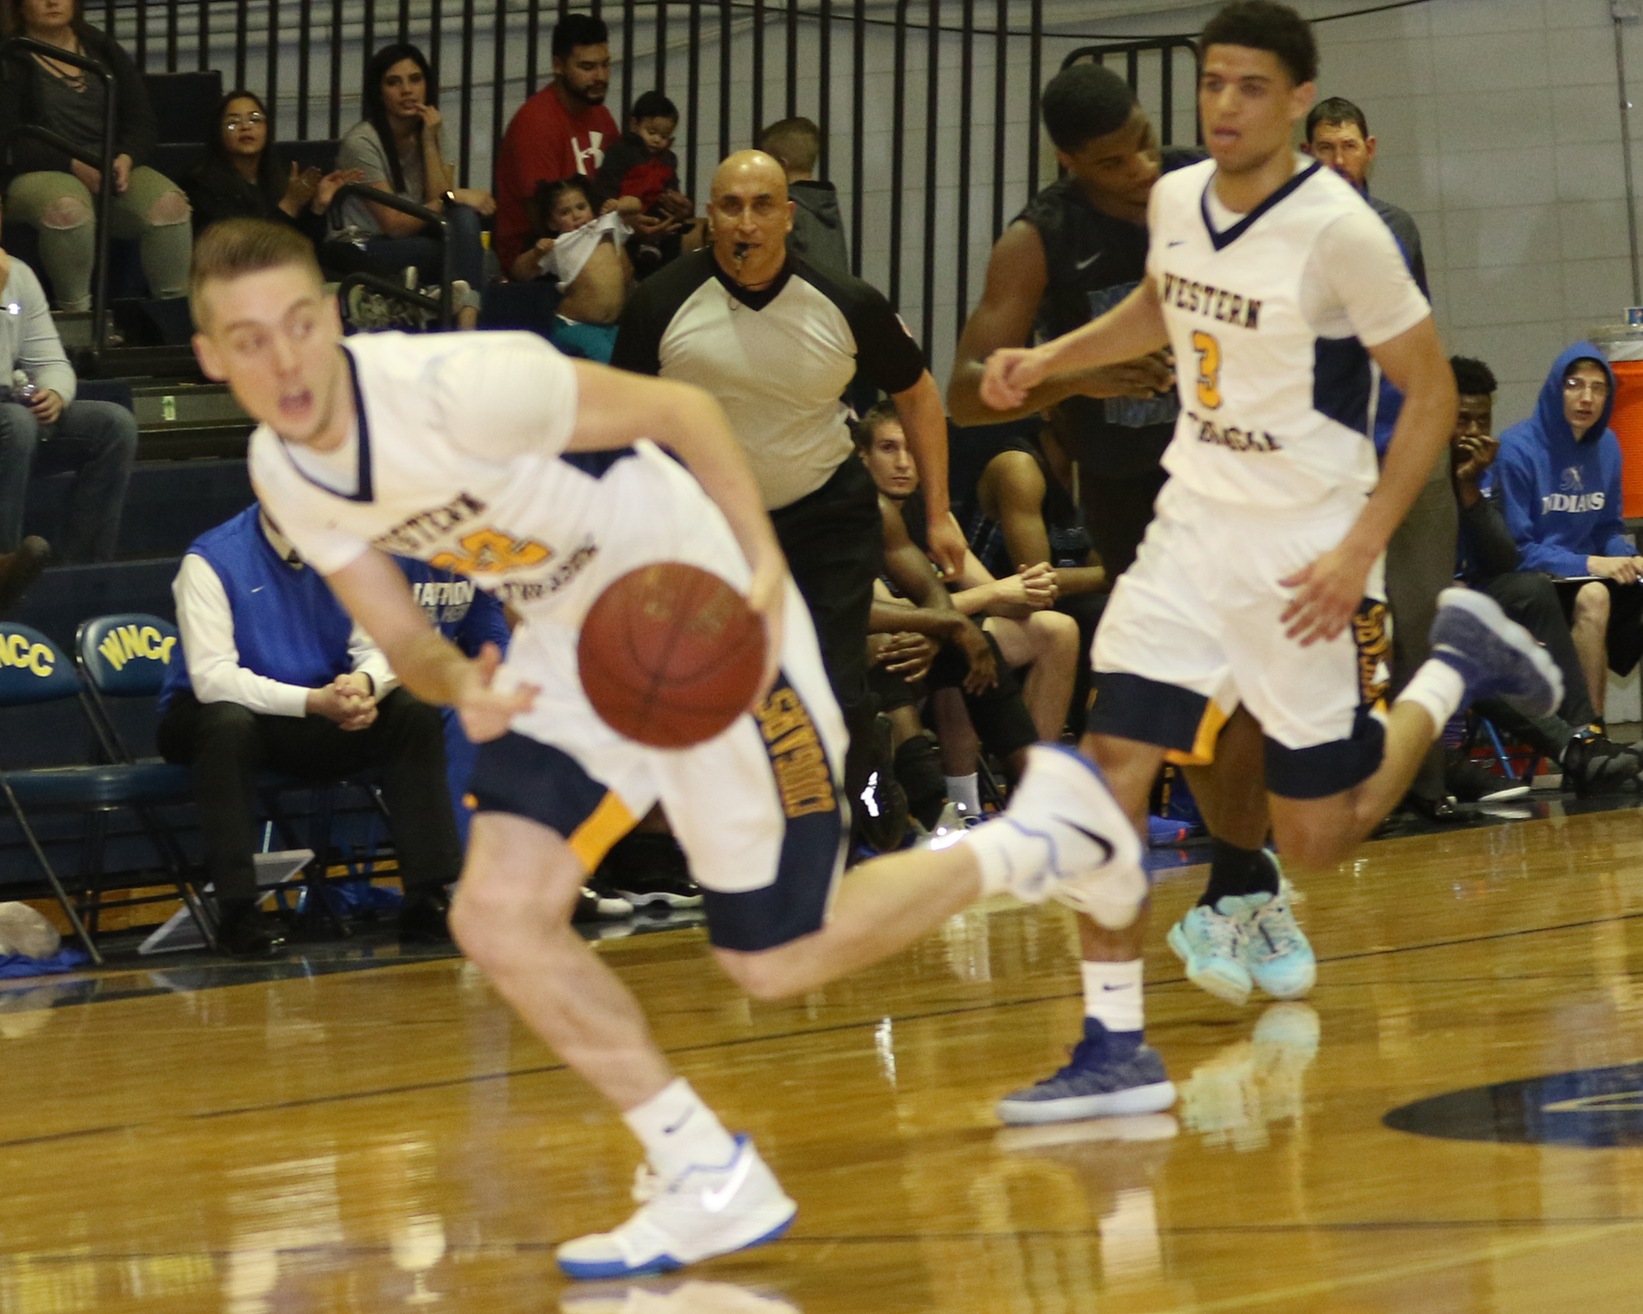 WNCC men top McCook, win first round regional game